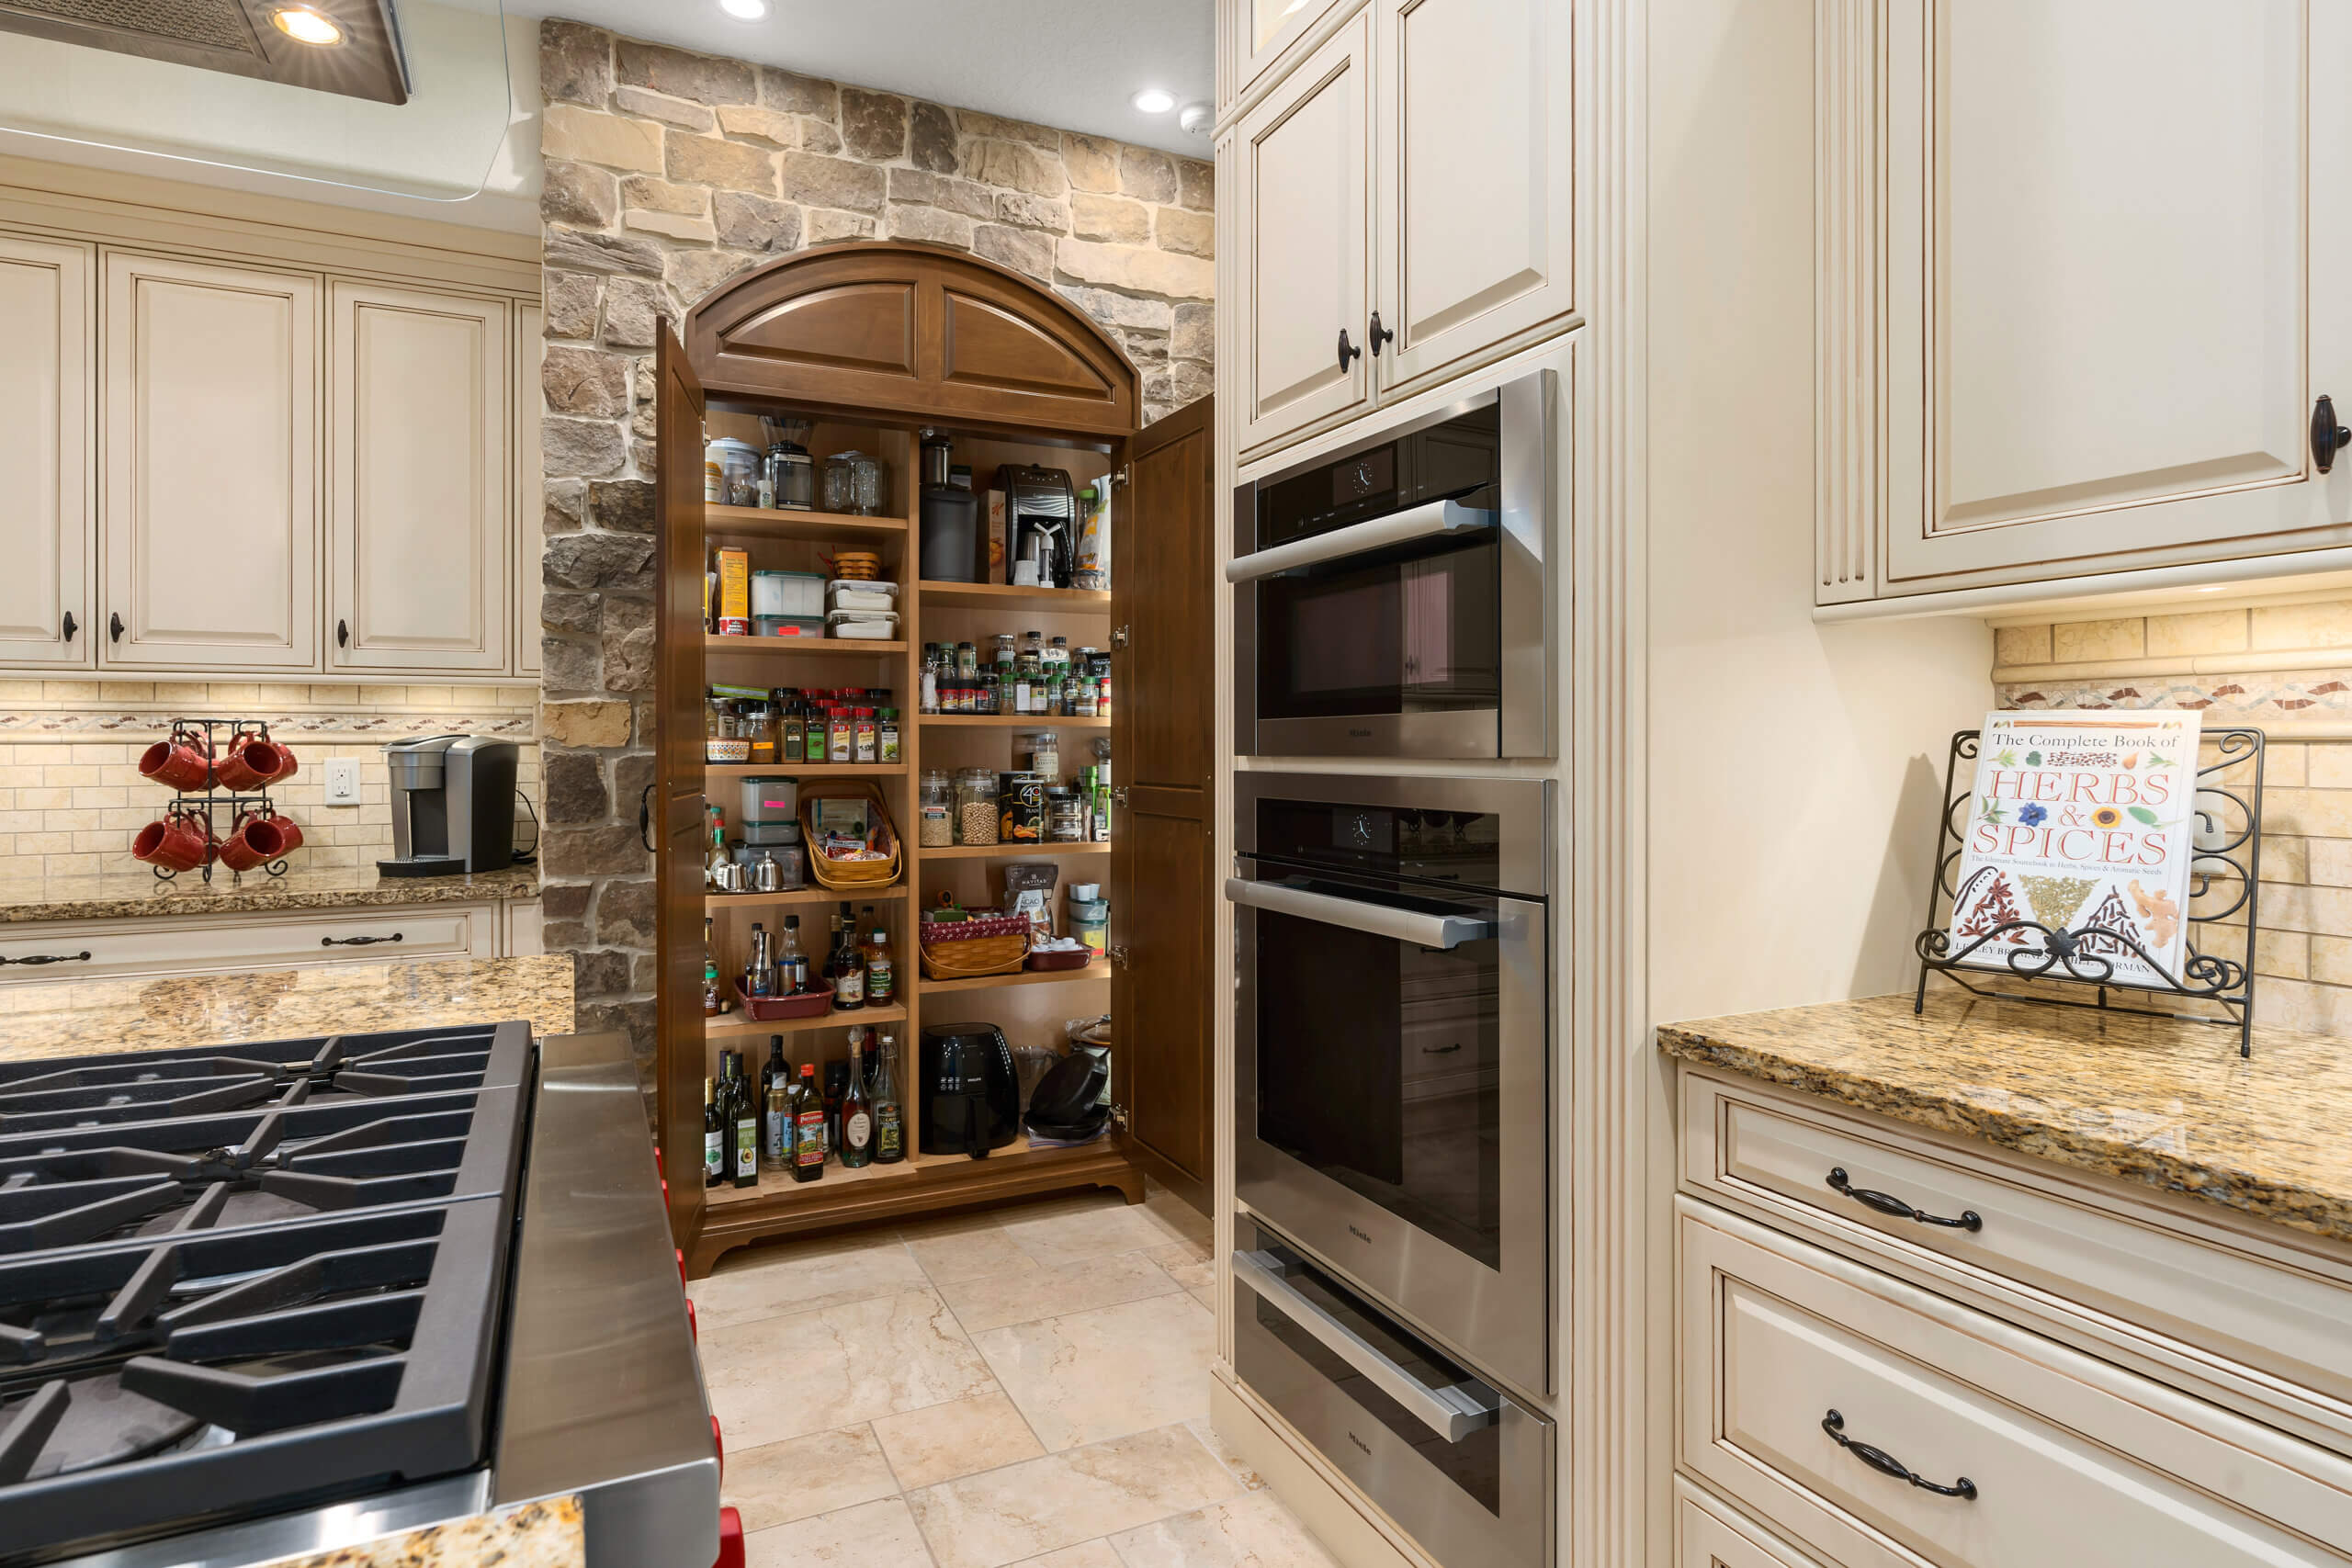 Luxury kitchen with large built-in pantry and upscale appliances